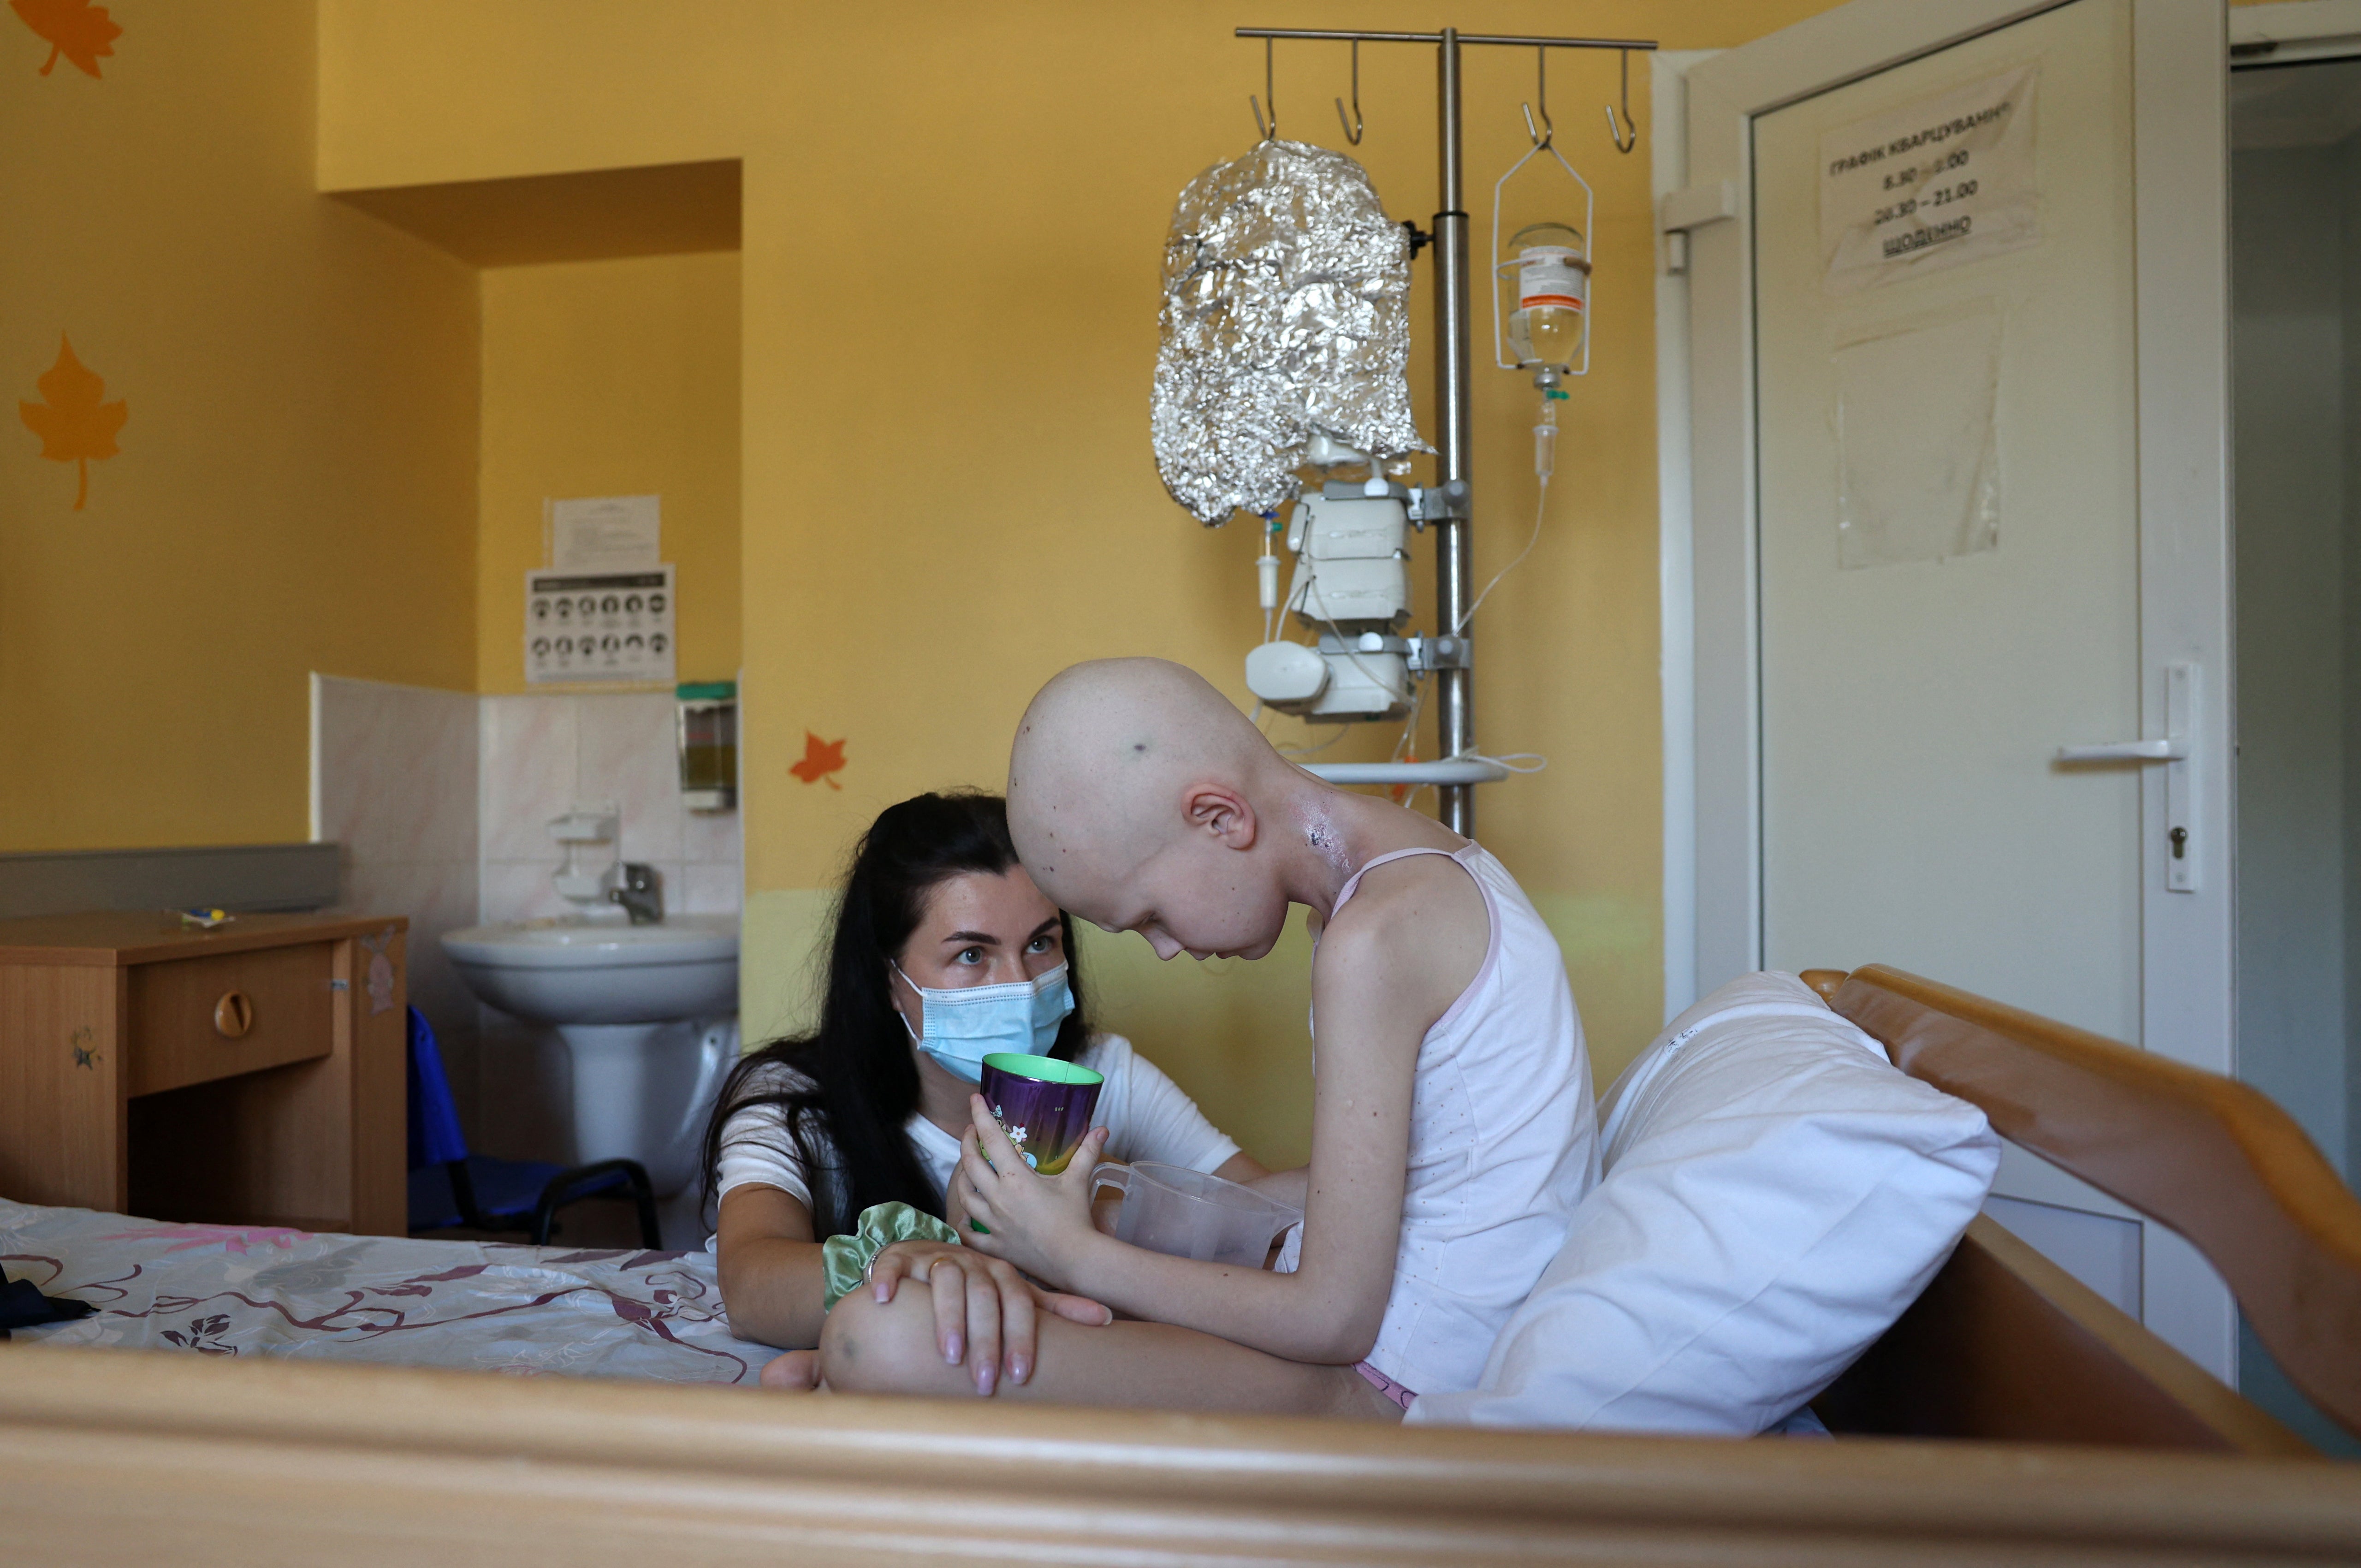 Darya Vertetska, 33, talks to her daughter Kira, 8, in the children's ward of the National Cancer Institute in Kyiv. Kira was injured by glass fragments in a Russian missile attack on the Okhmatdyt Children's Hospital on July 8 and was taken to the National Cancer Institute along with her mother.